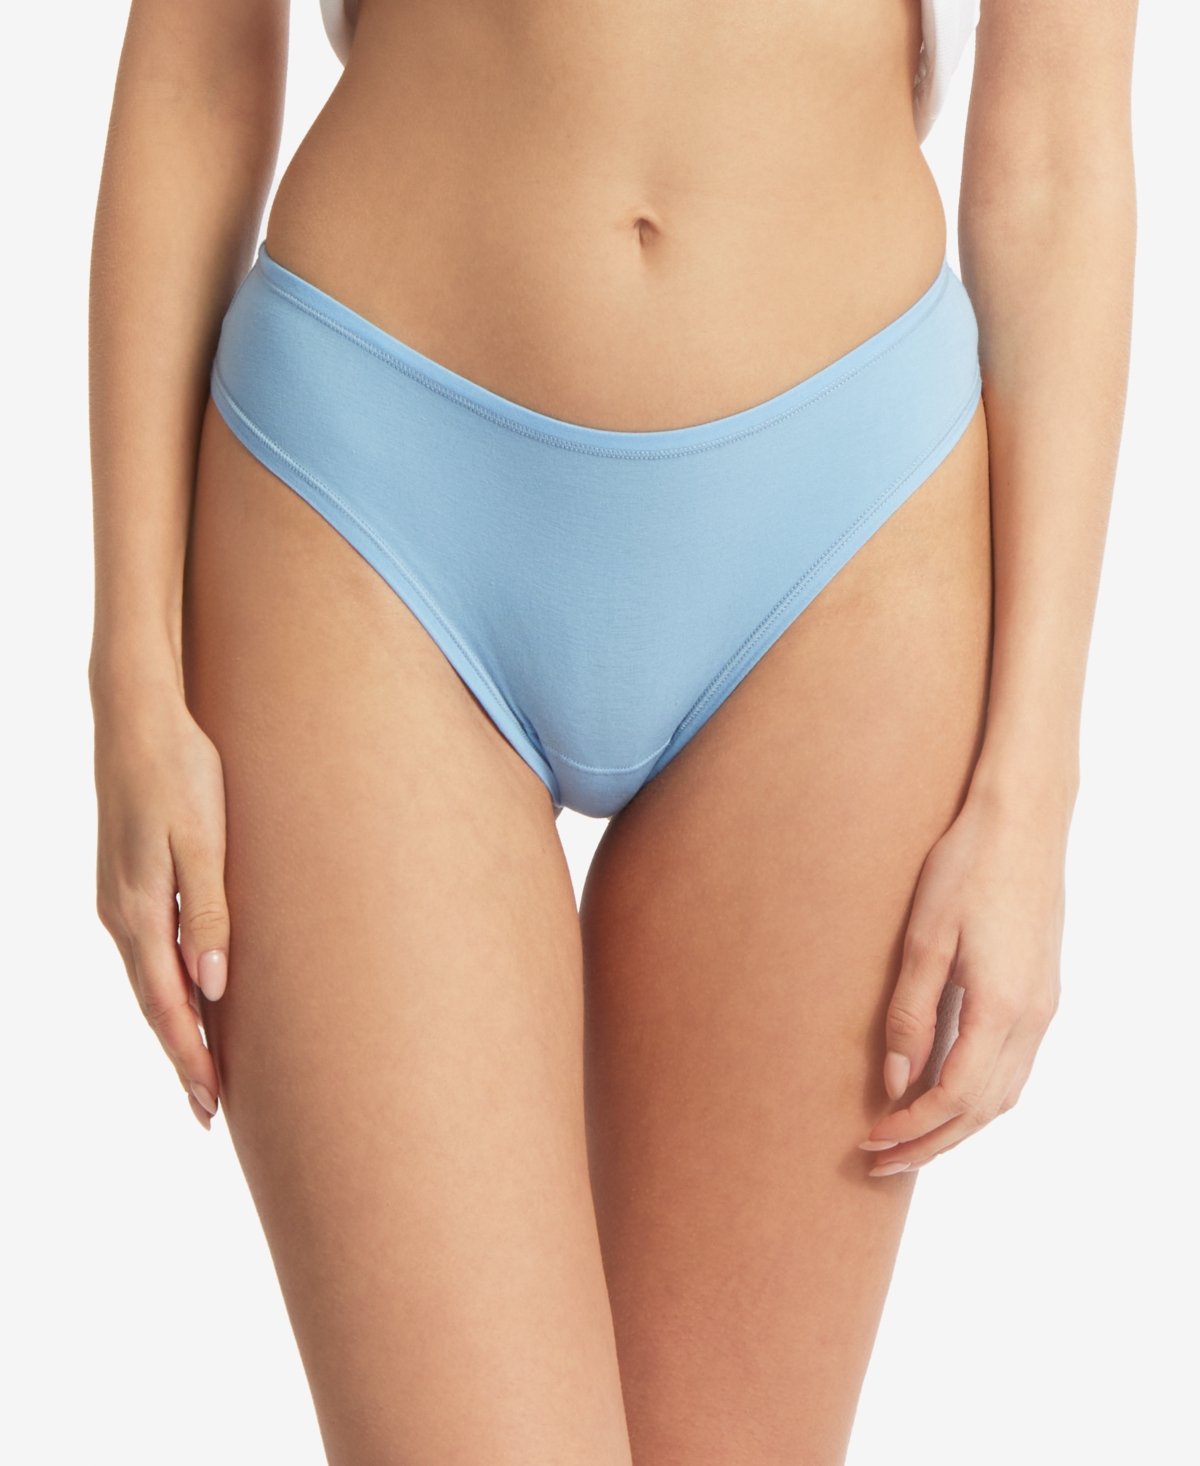 Hanky Panky Women's Playstretch Natural Rise Thong Underwear 721924 In Partly Cloudy Blue